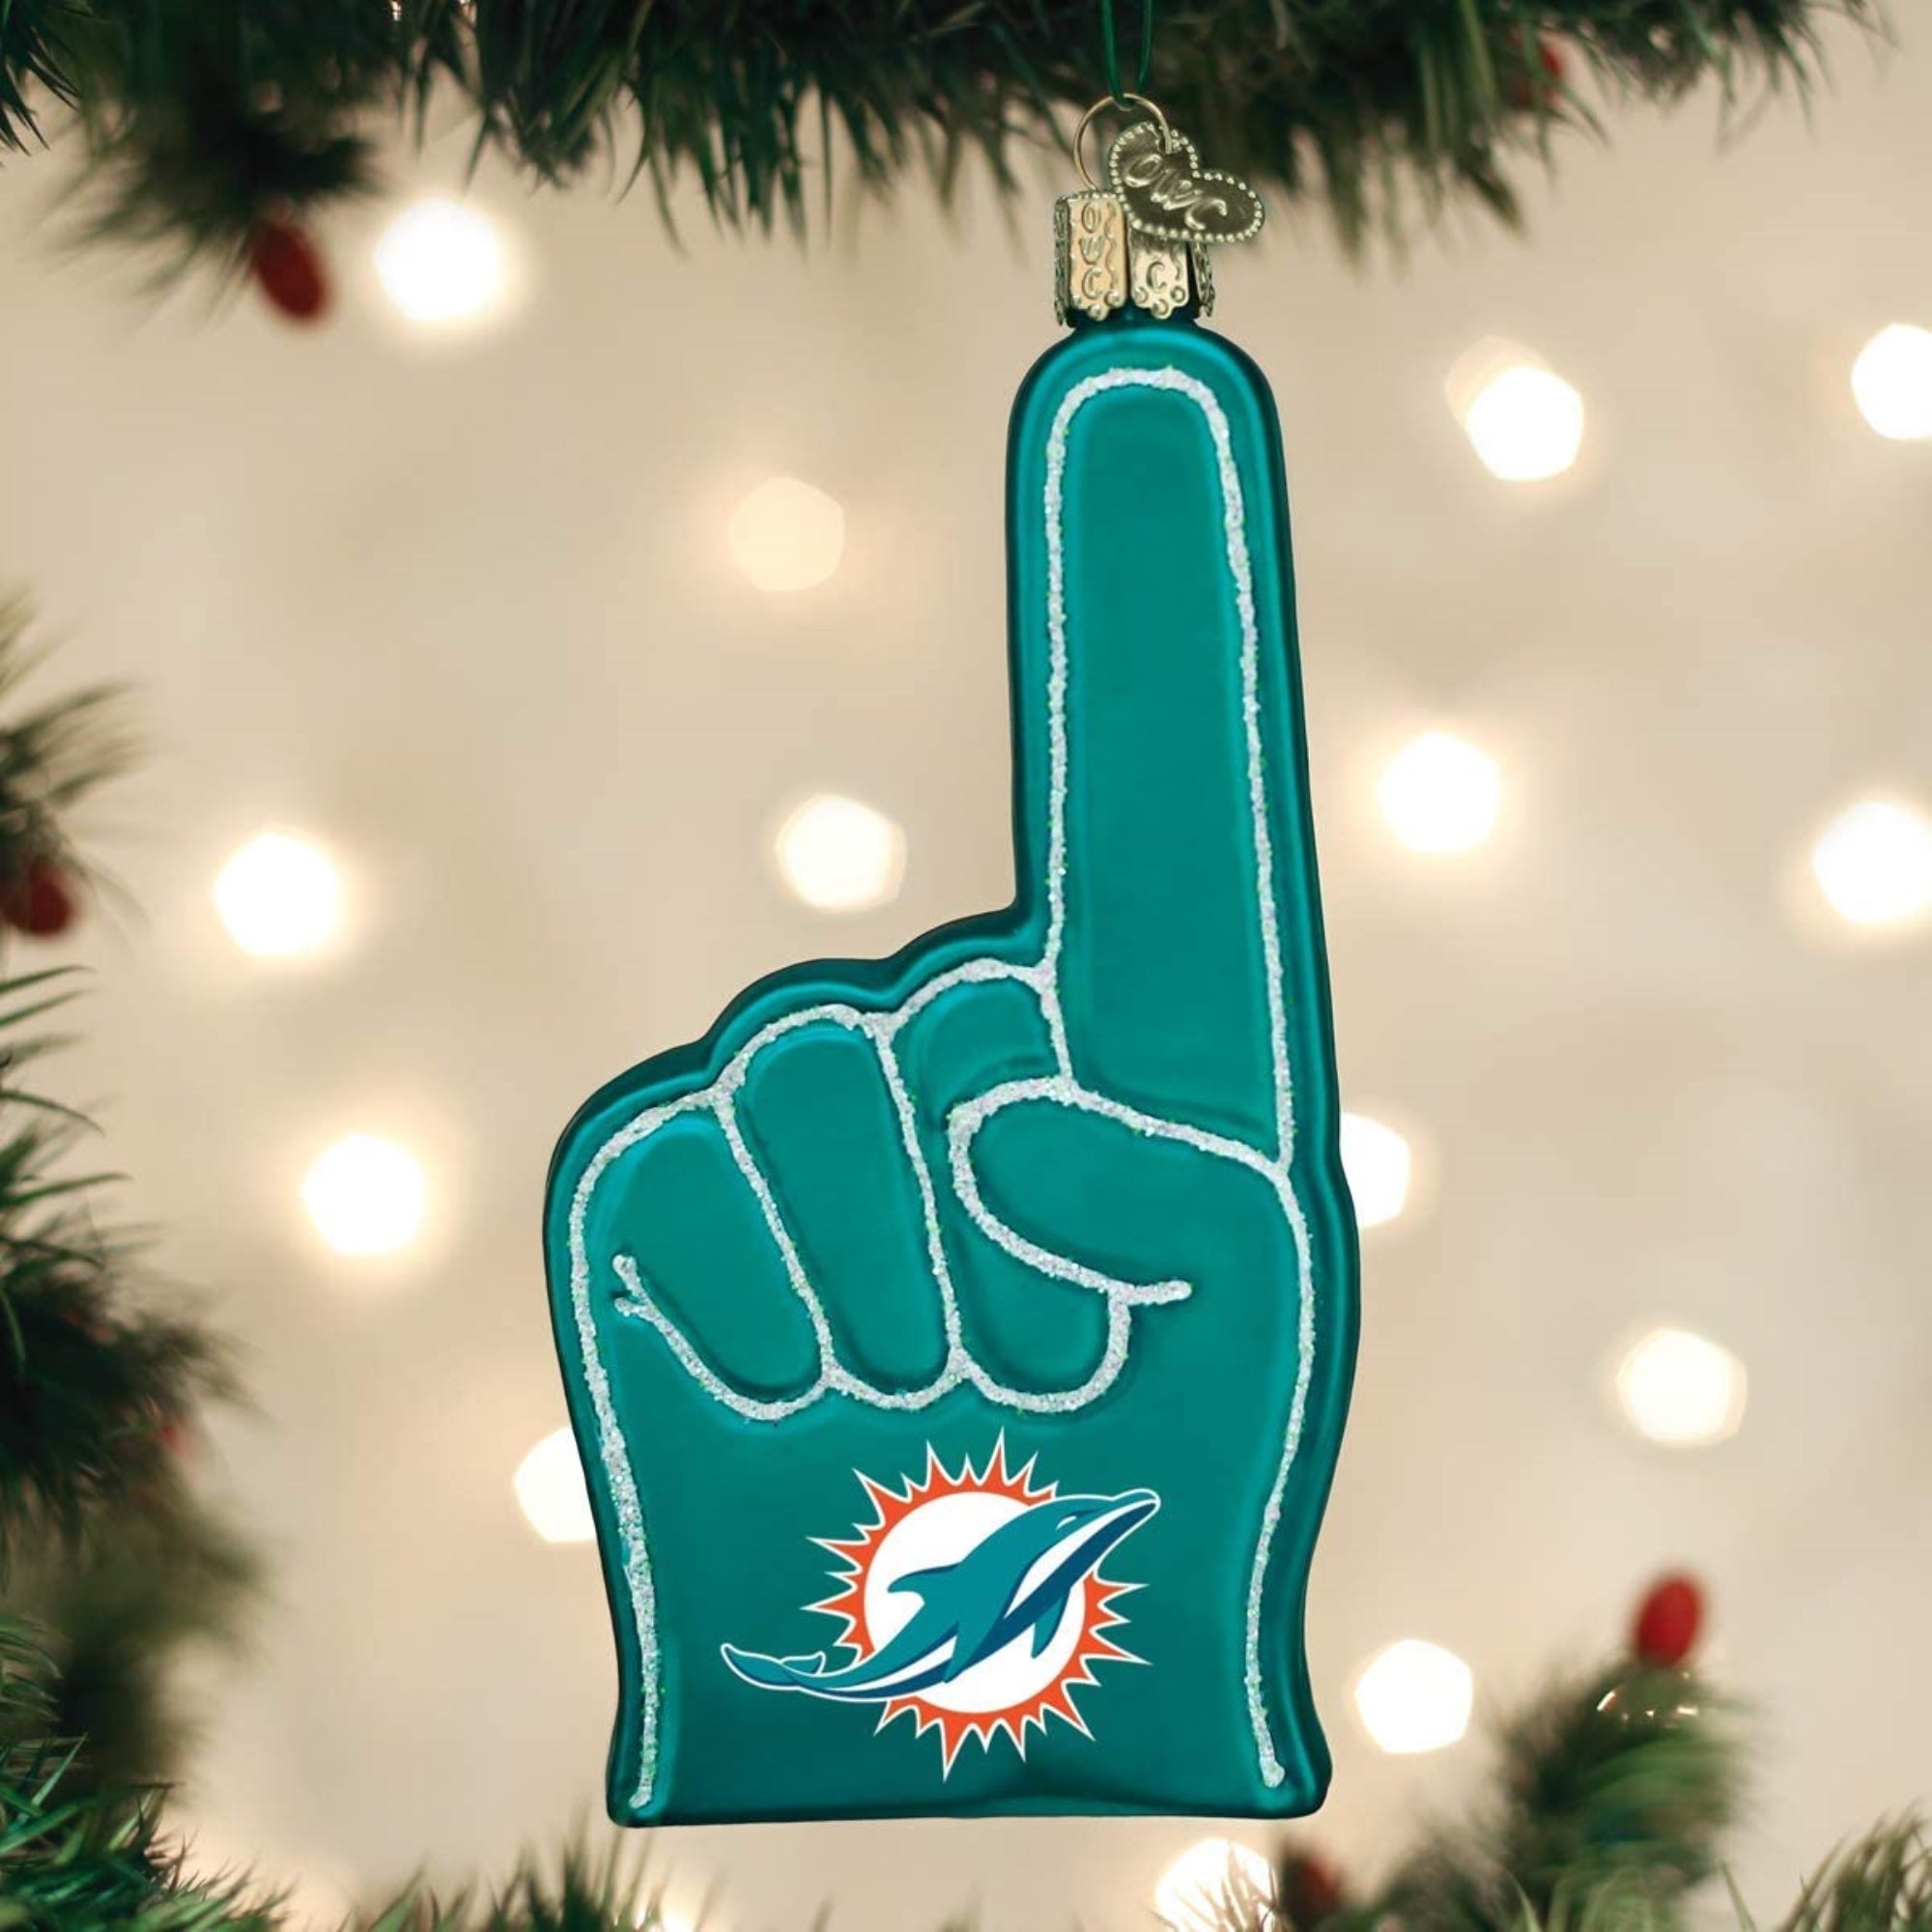 Old World Christmas Miami Dolphins Foam Finger Ornament For Christmas Tree